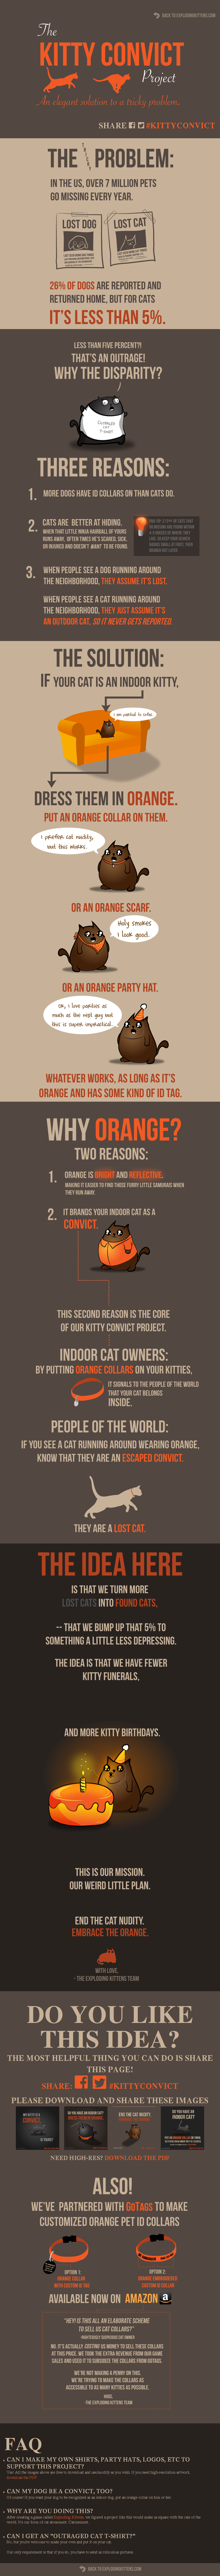 The Kitty Convict Project Info Graphic